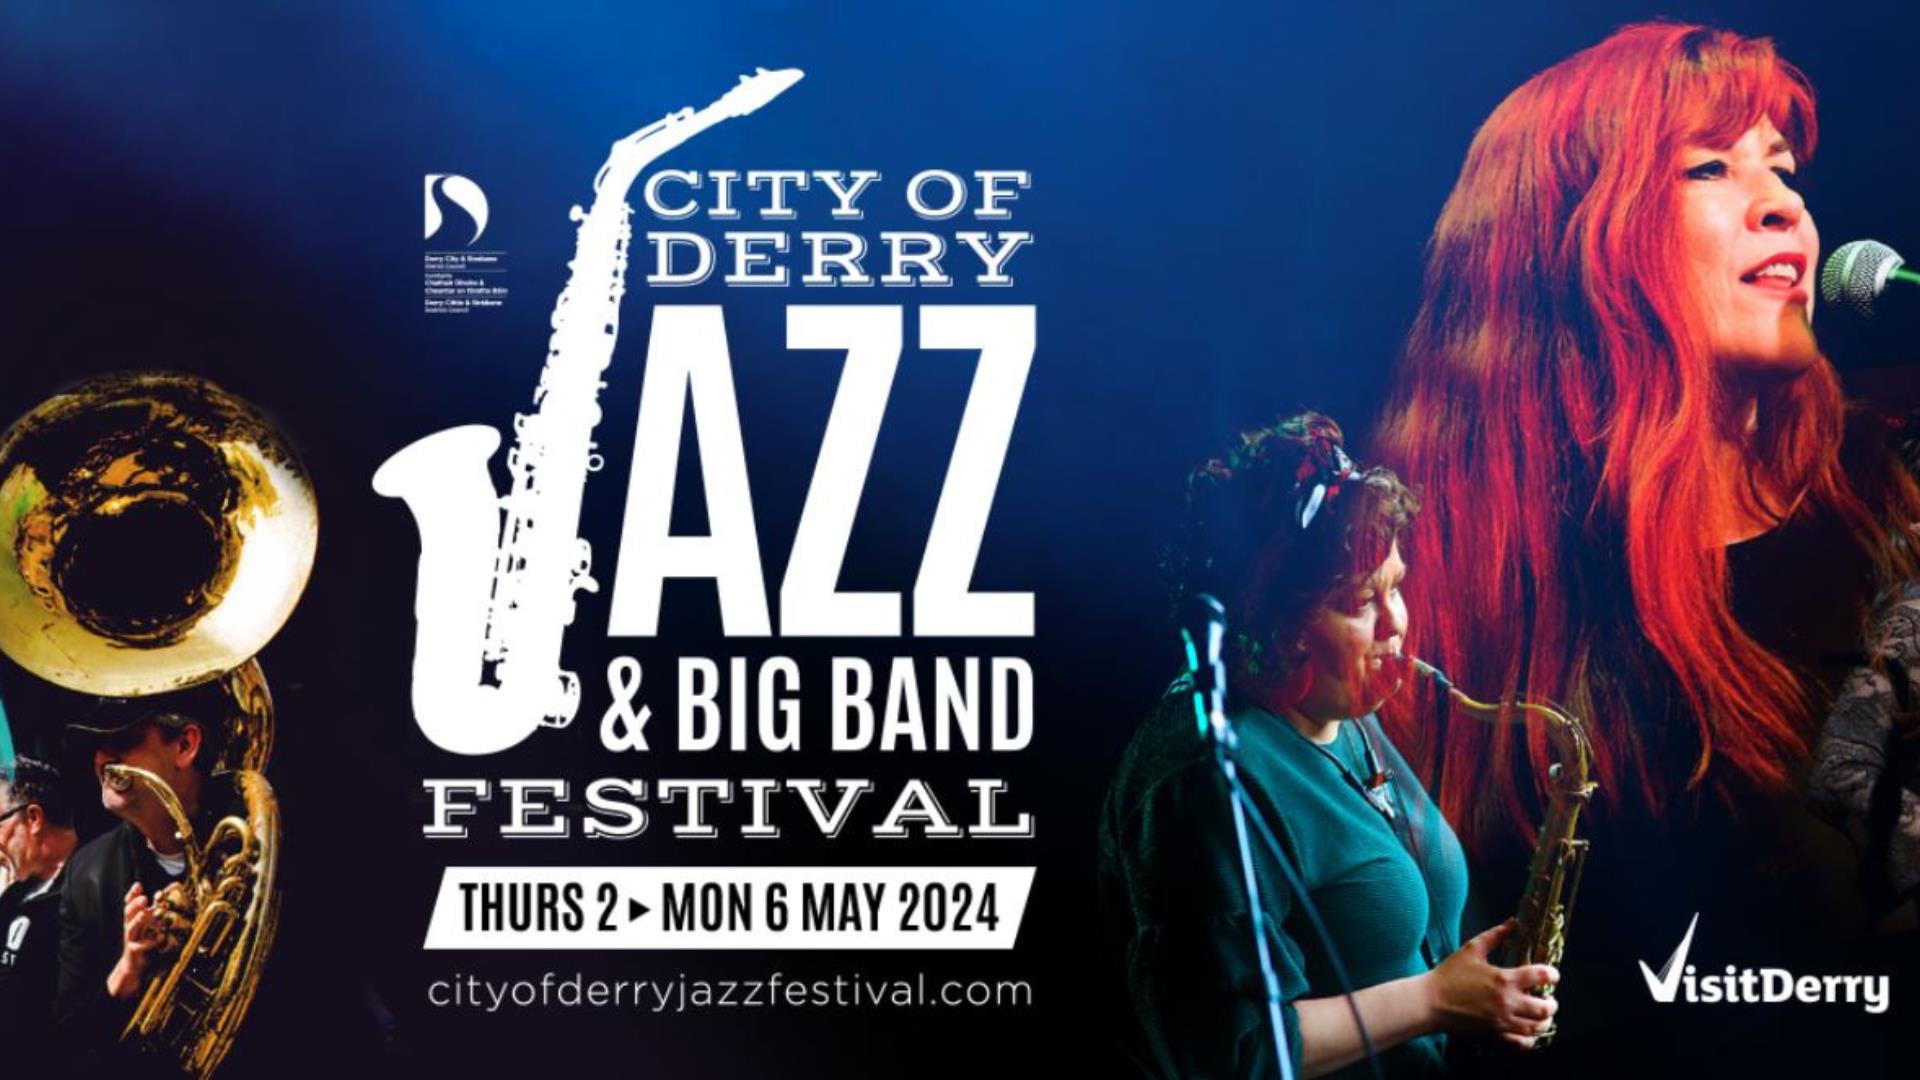 Promotional banner for the 2024 City of Derry Jazz & Big Band Festival